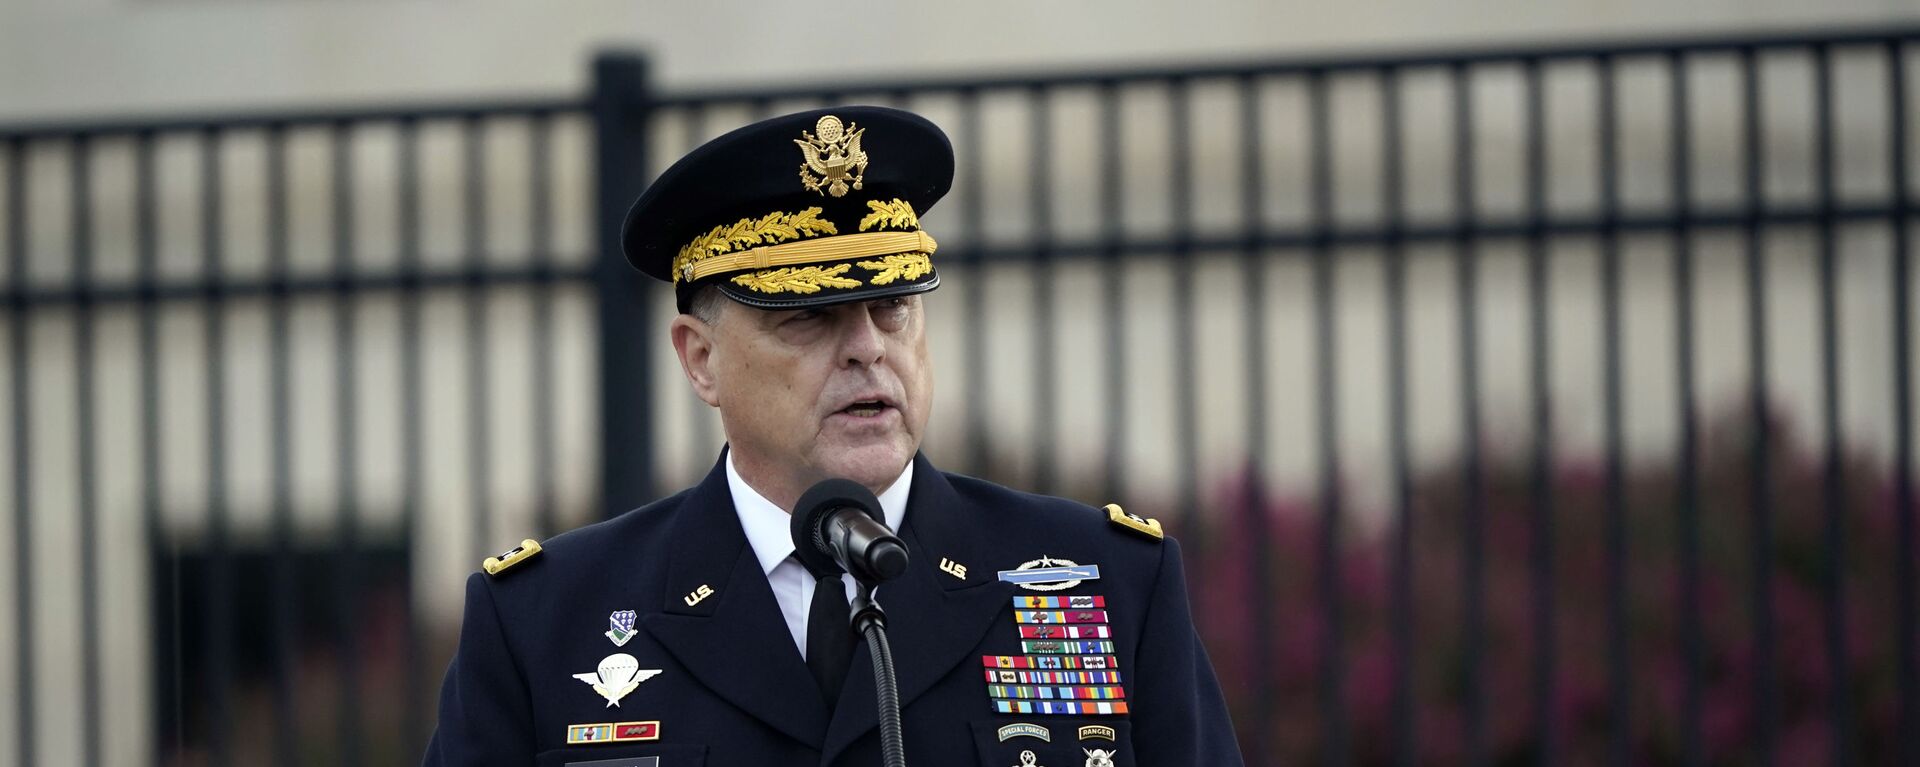 Chairman of the Joint Chiefs Gen. Mark Milley speaks during a ceremony at the National 9/11 Pentagon Memorial to honor the 184 people killed in the 2001 terrorist attack on the Pentagon, in Washington, Friday Sept. 11, 2020 - اسپوتنیک افغانستان  , 1920, 18.02.2023